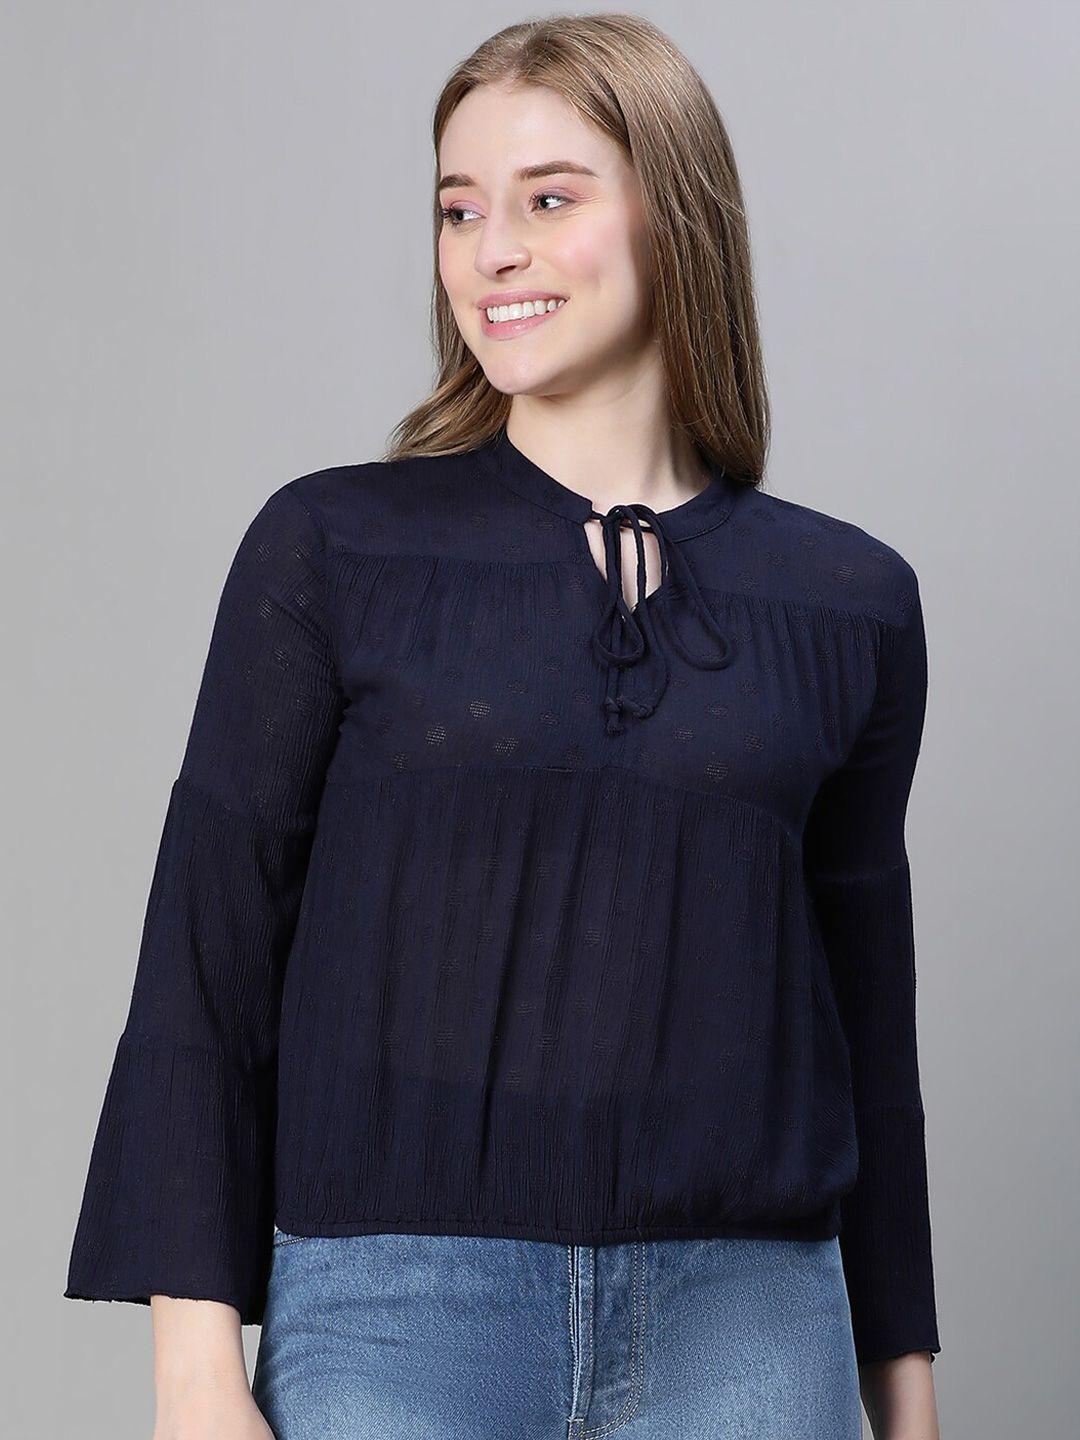 oxolloxo tie-up neck bell sleeves dobby top